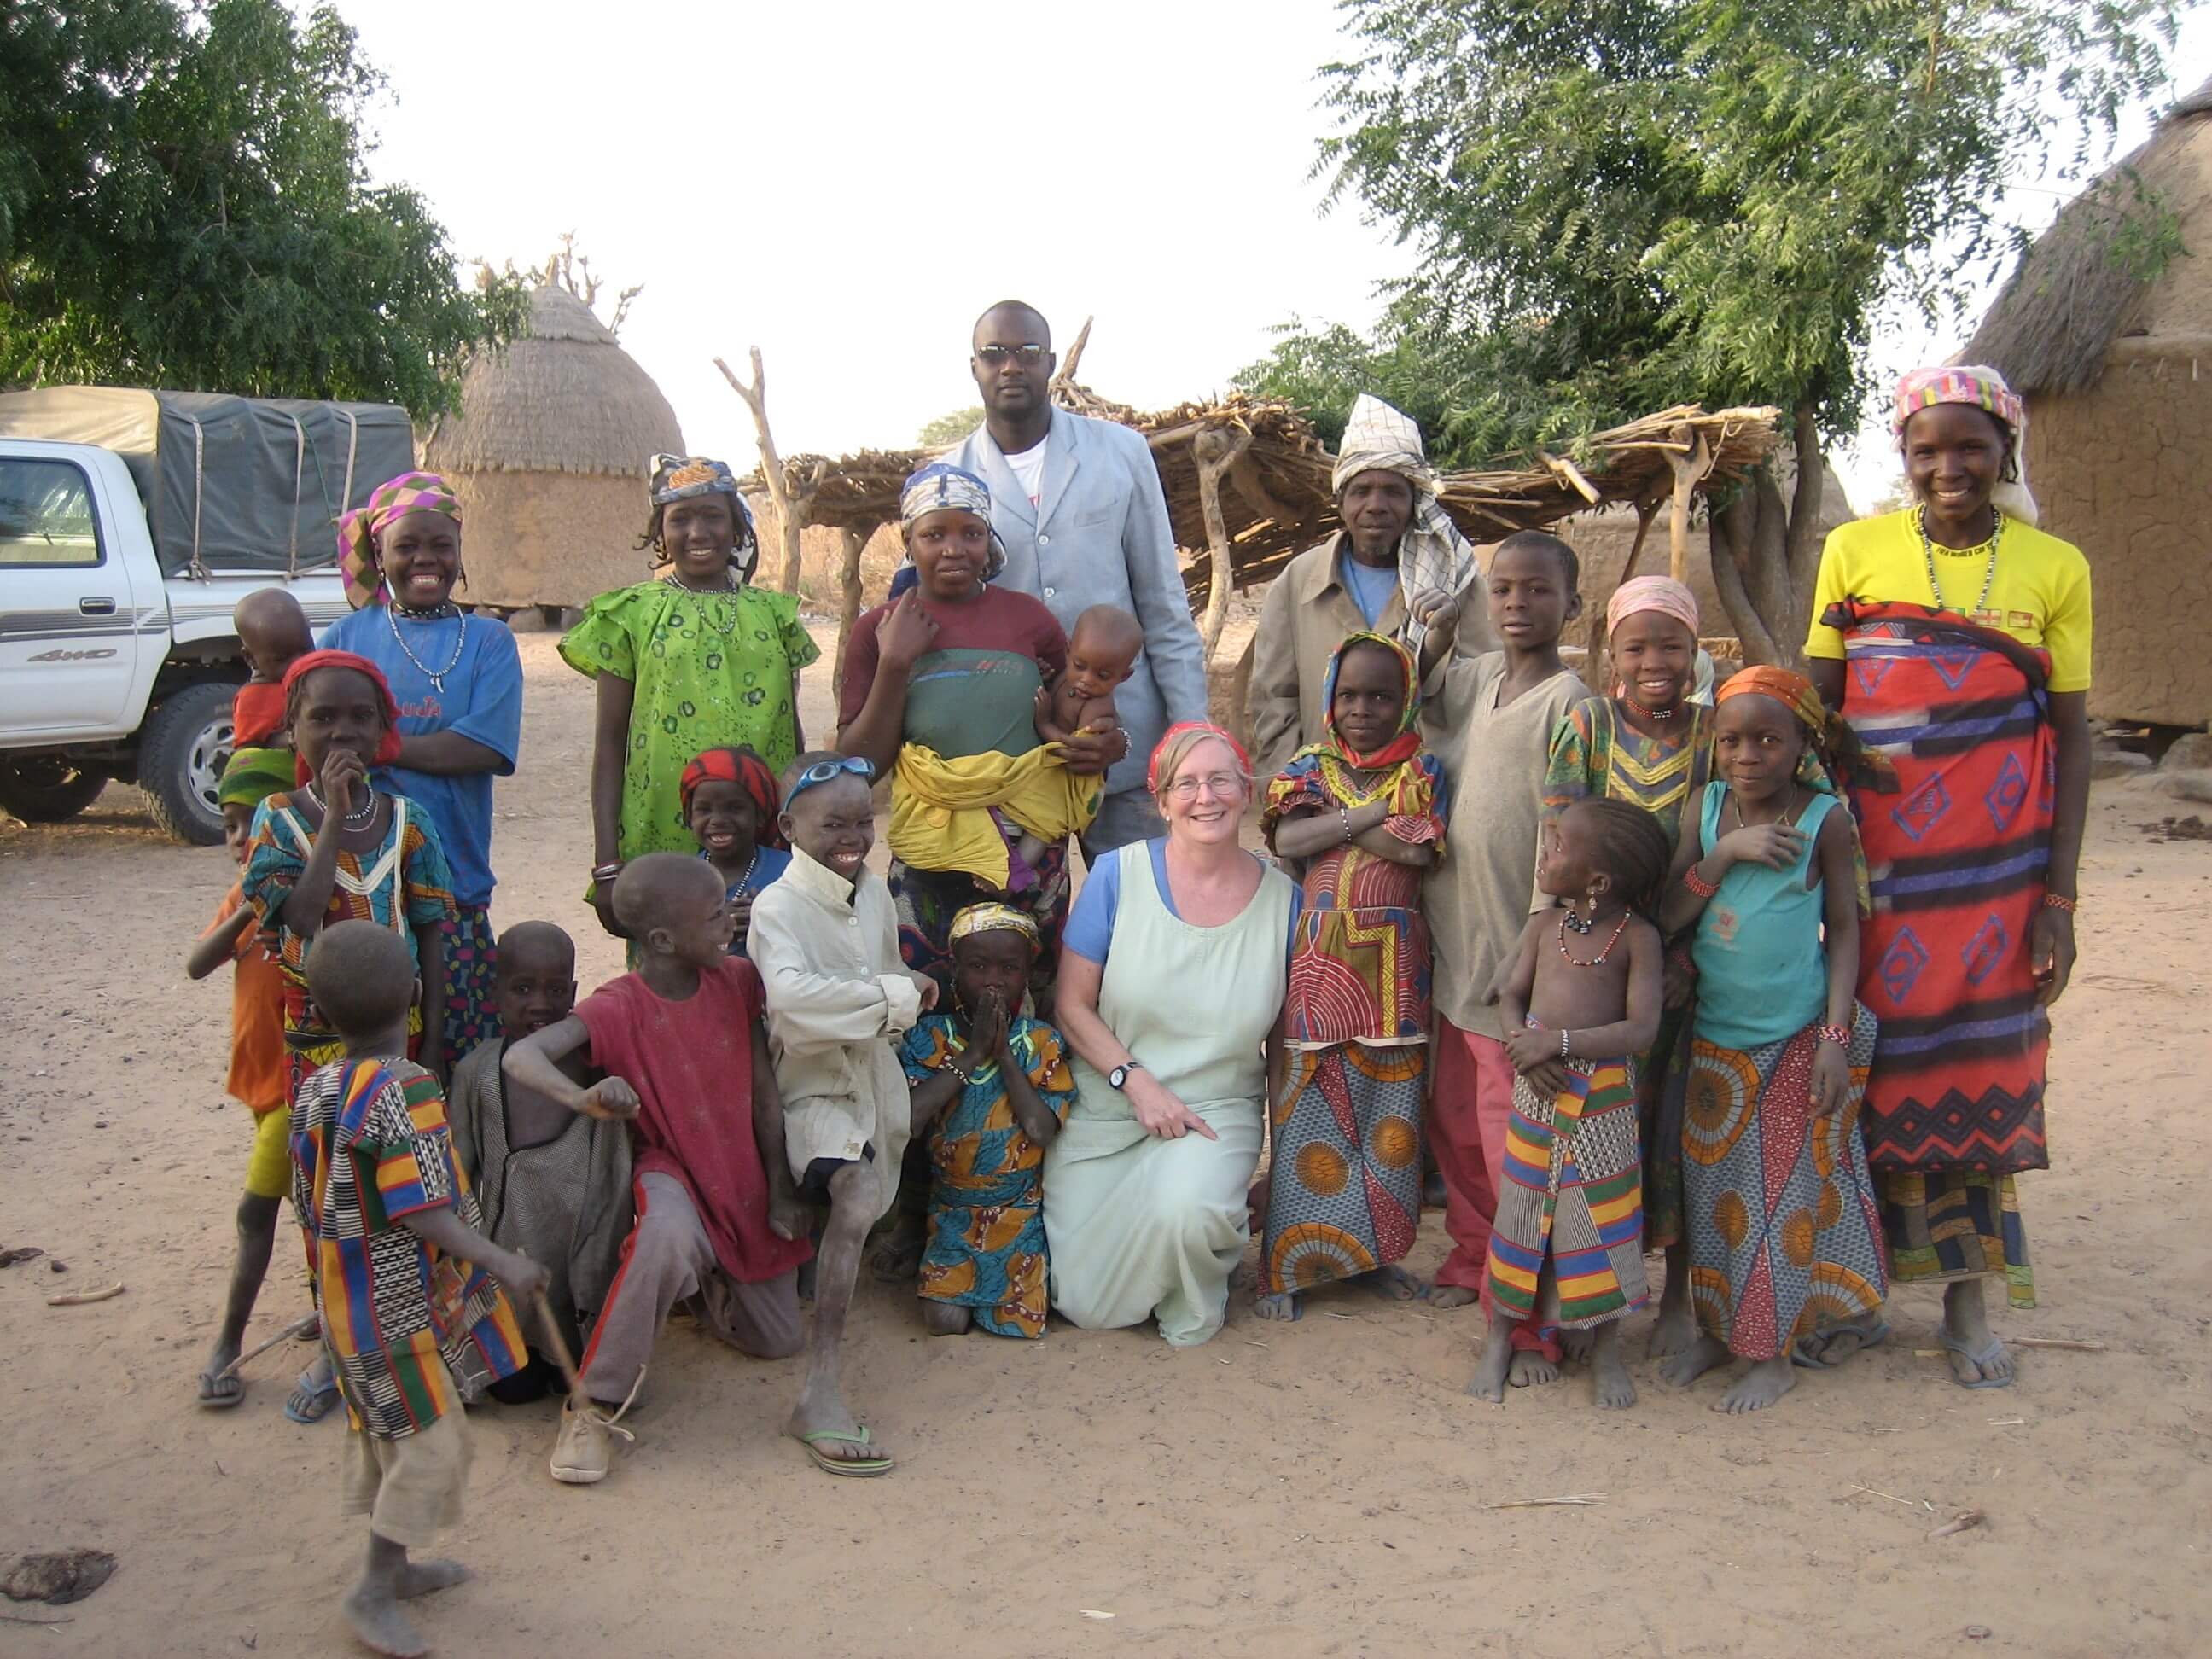 Sheila West visits with patients in africa